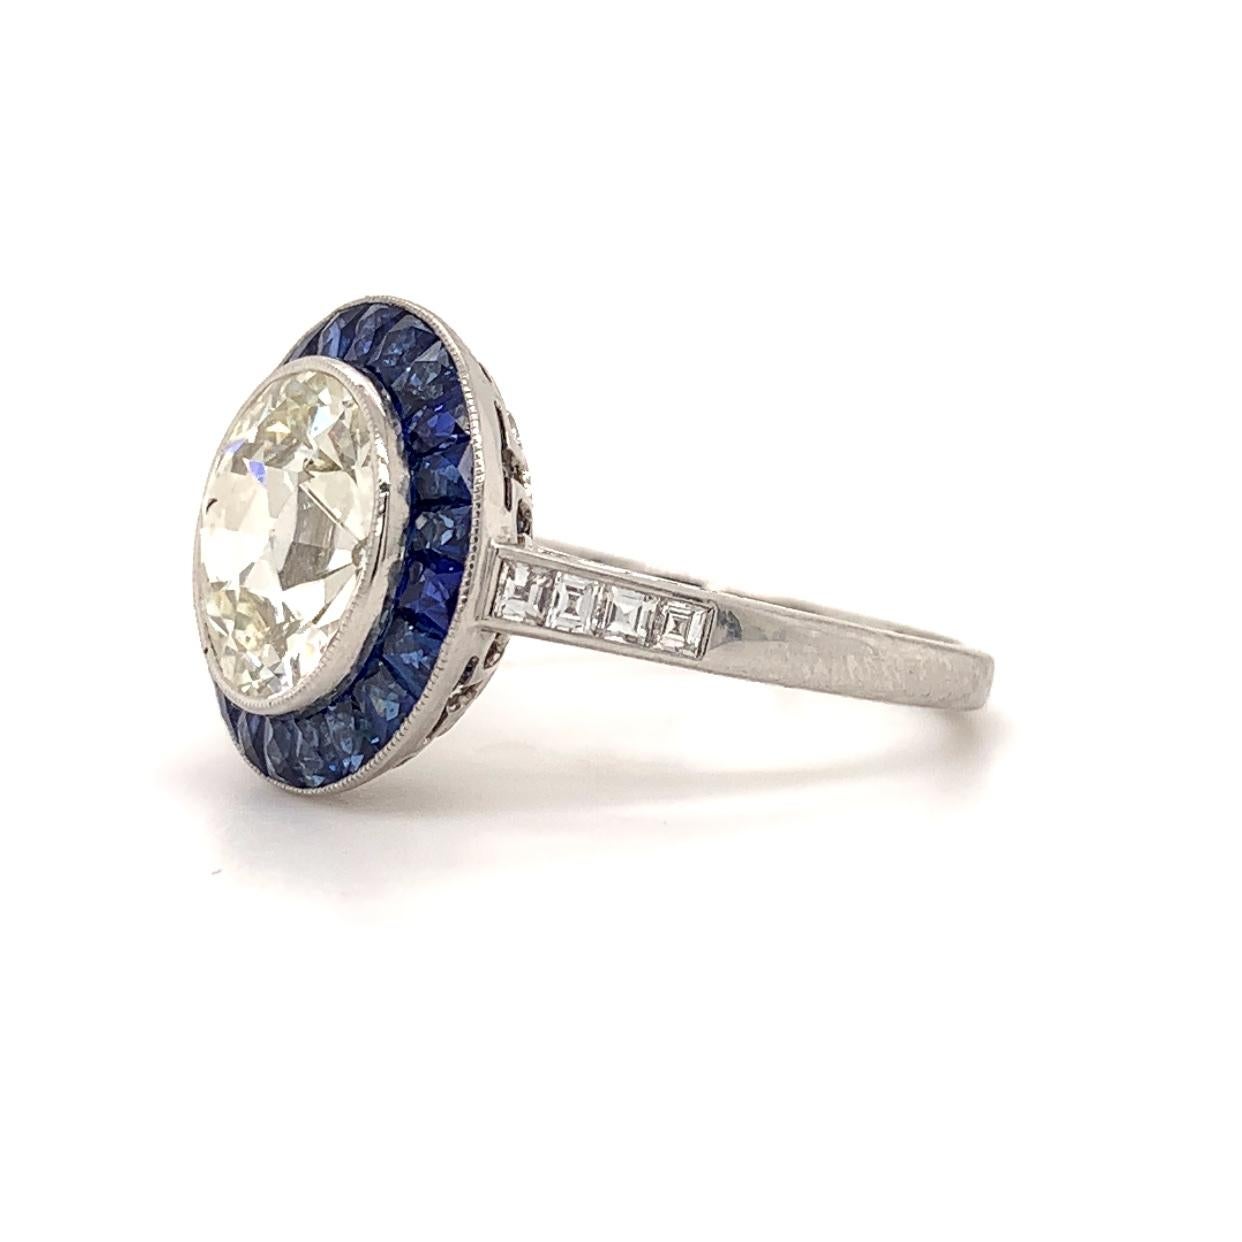 Sophia D. Elegant platinum Old European 3.04 carat center round diamond with a color and clarity of M-VS2 surrounded with blue sapphires weighing 0.90 carats and diamonds weighing 0.20 carat ring.

Sophia D by Joseph Dardashti LTD has been known